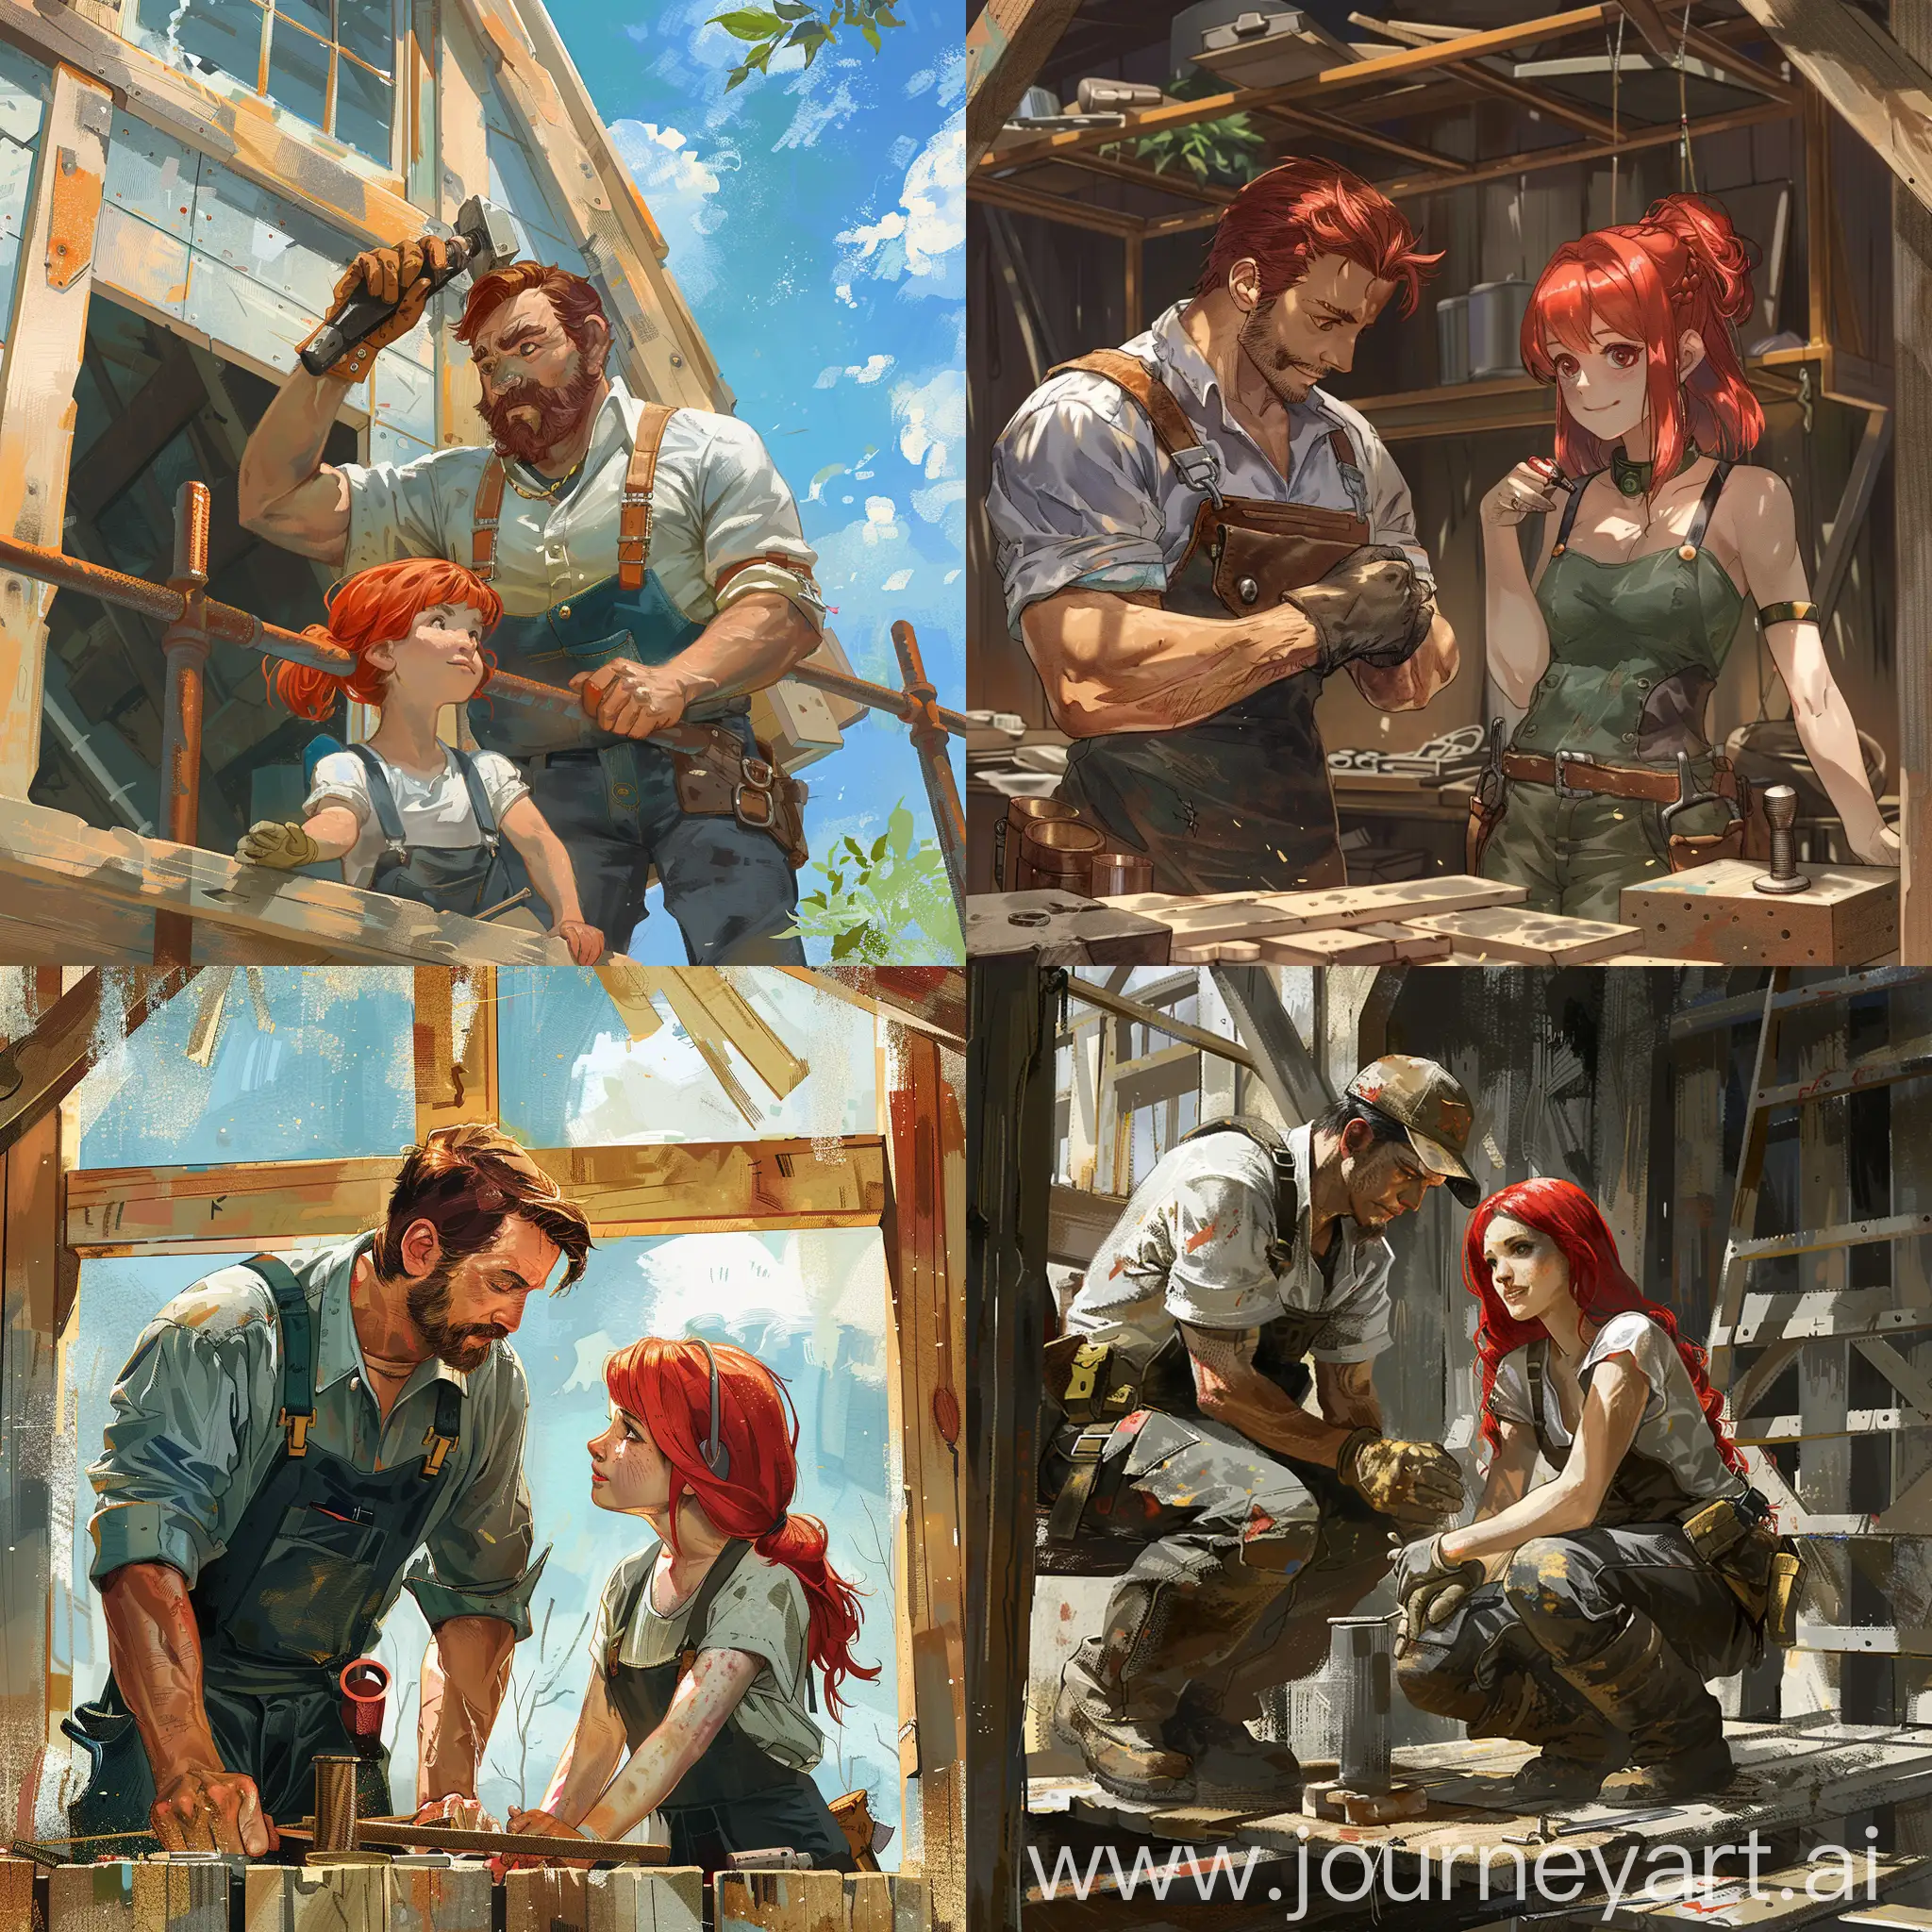 Metalworker-and-RedHaired-Girl-Building-House-Artistic-Collaboration-in-a-Rustic-Setting